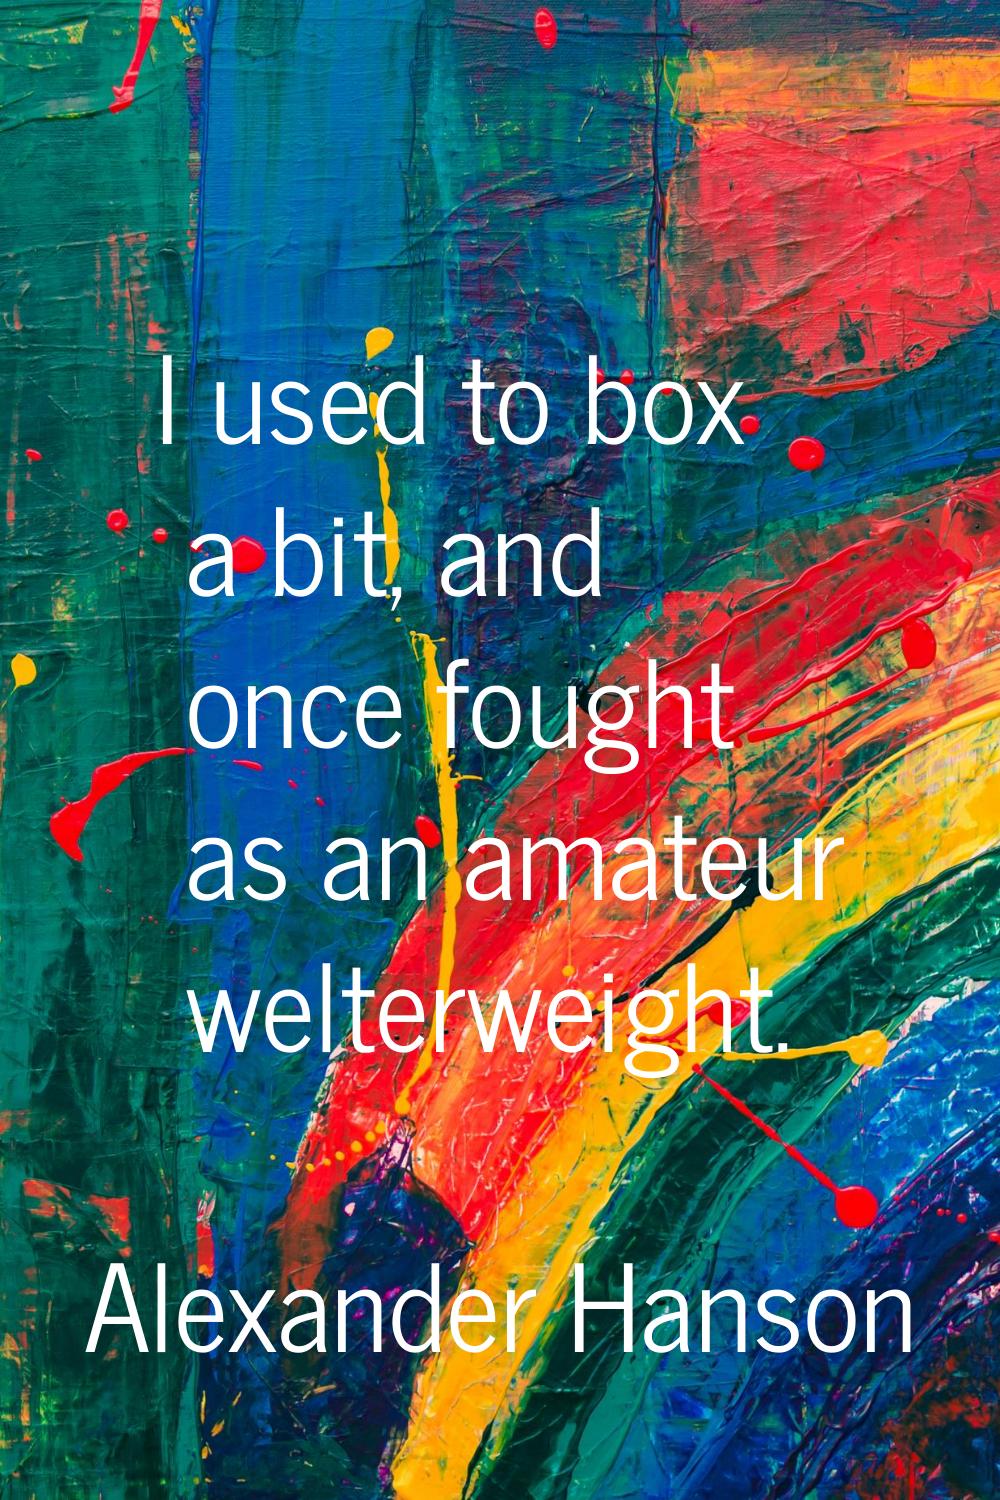 I used to box a bit, and once fought as an amateur welterweight.